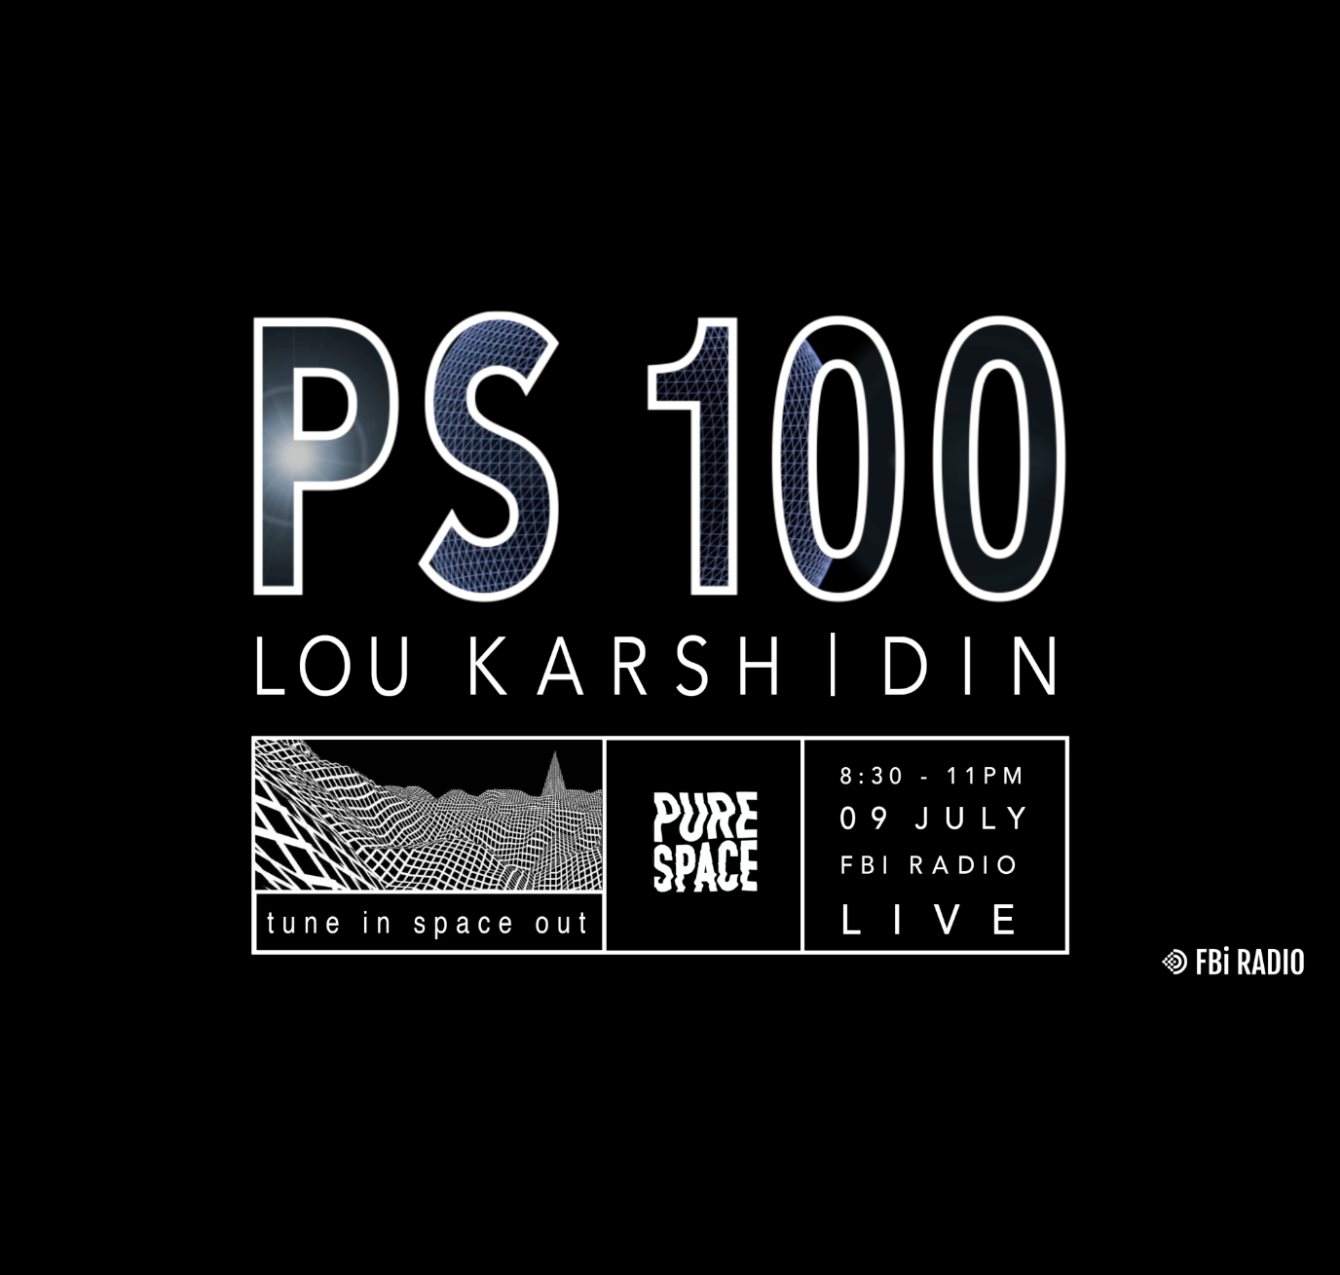 Ps100 - Pure Space's 100th Broadcast - Página frontal